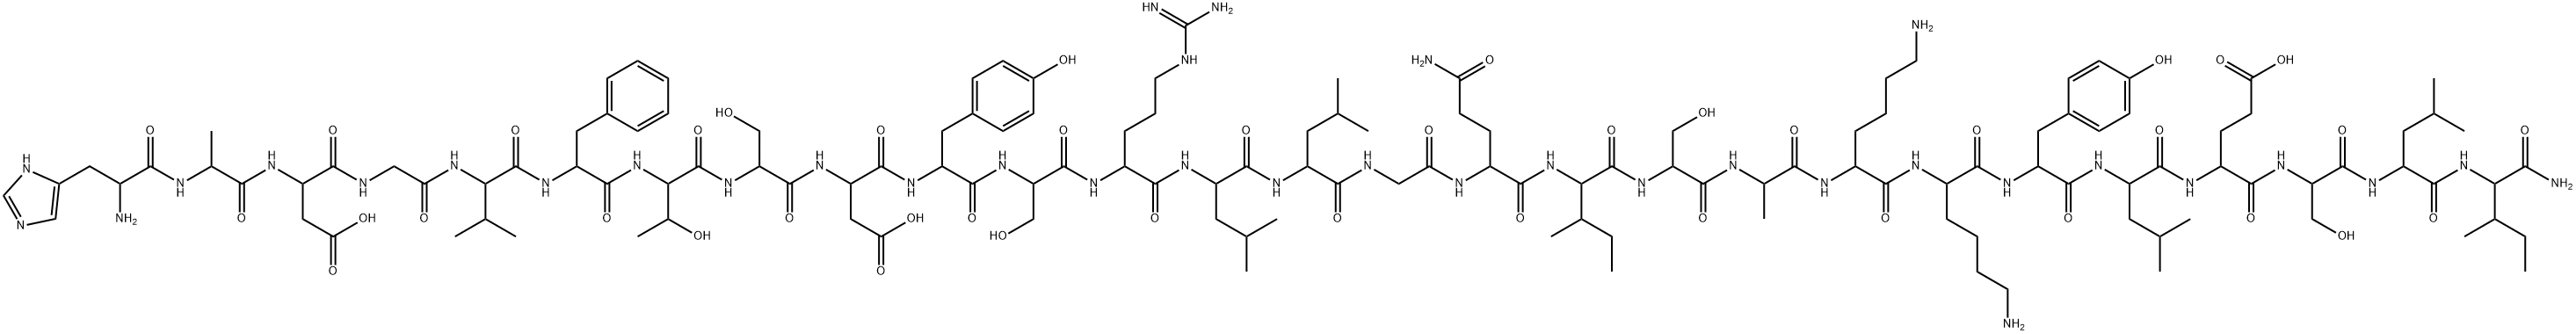 96849-38-6 PHI-27 FROM RAT